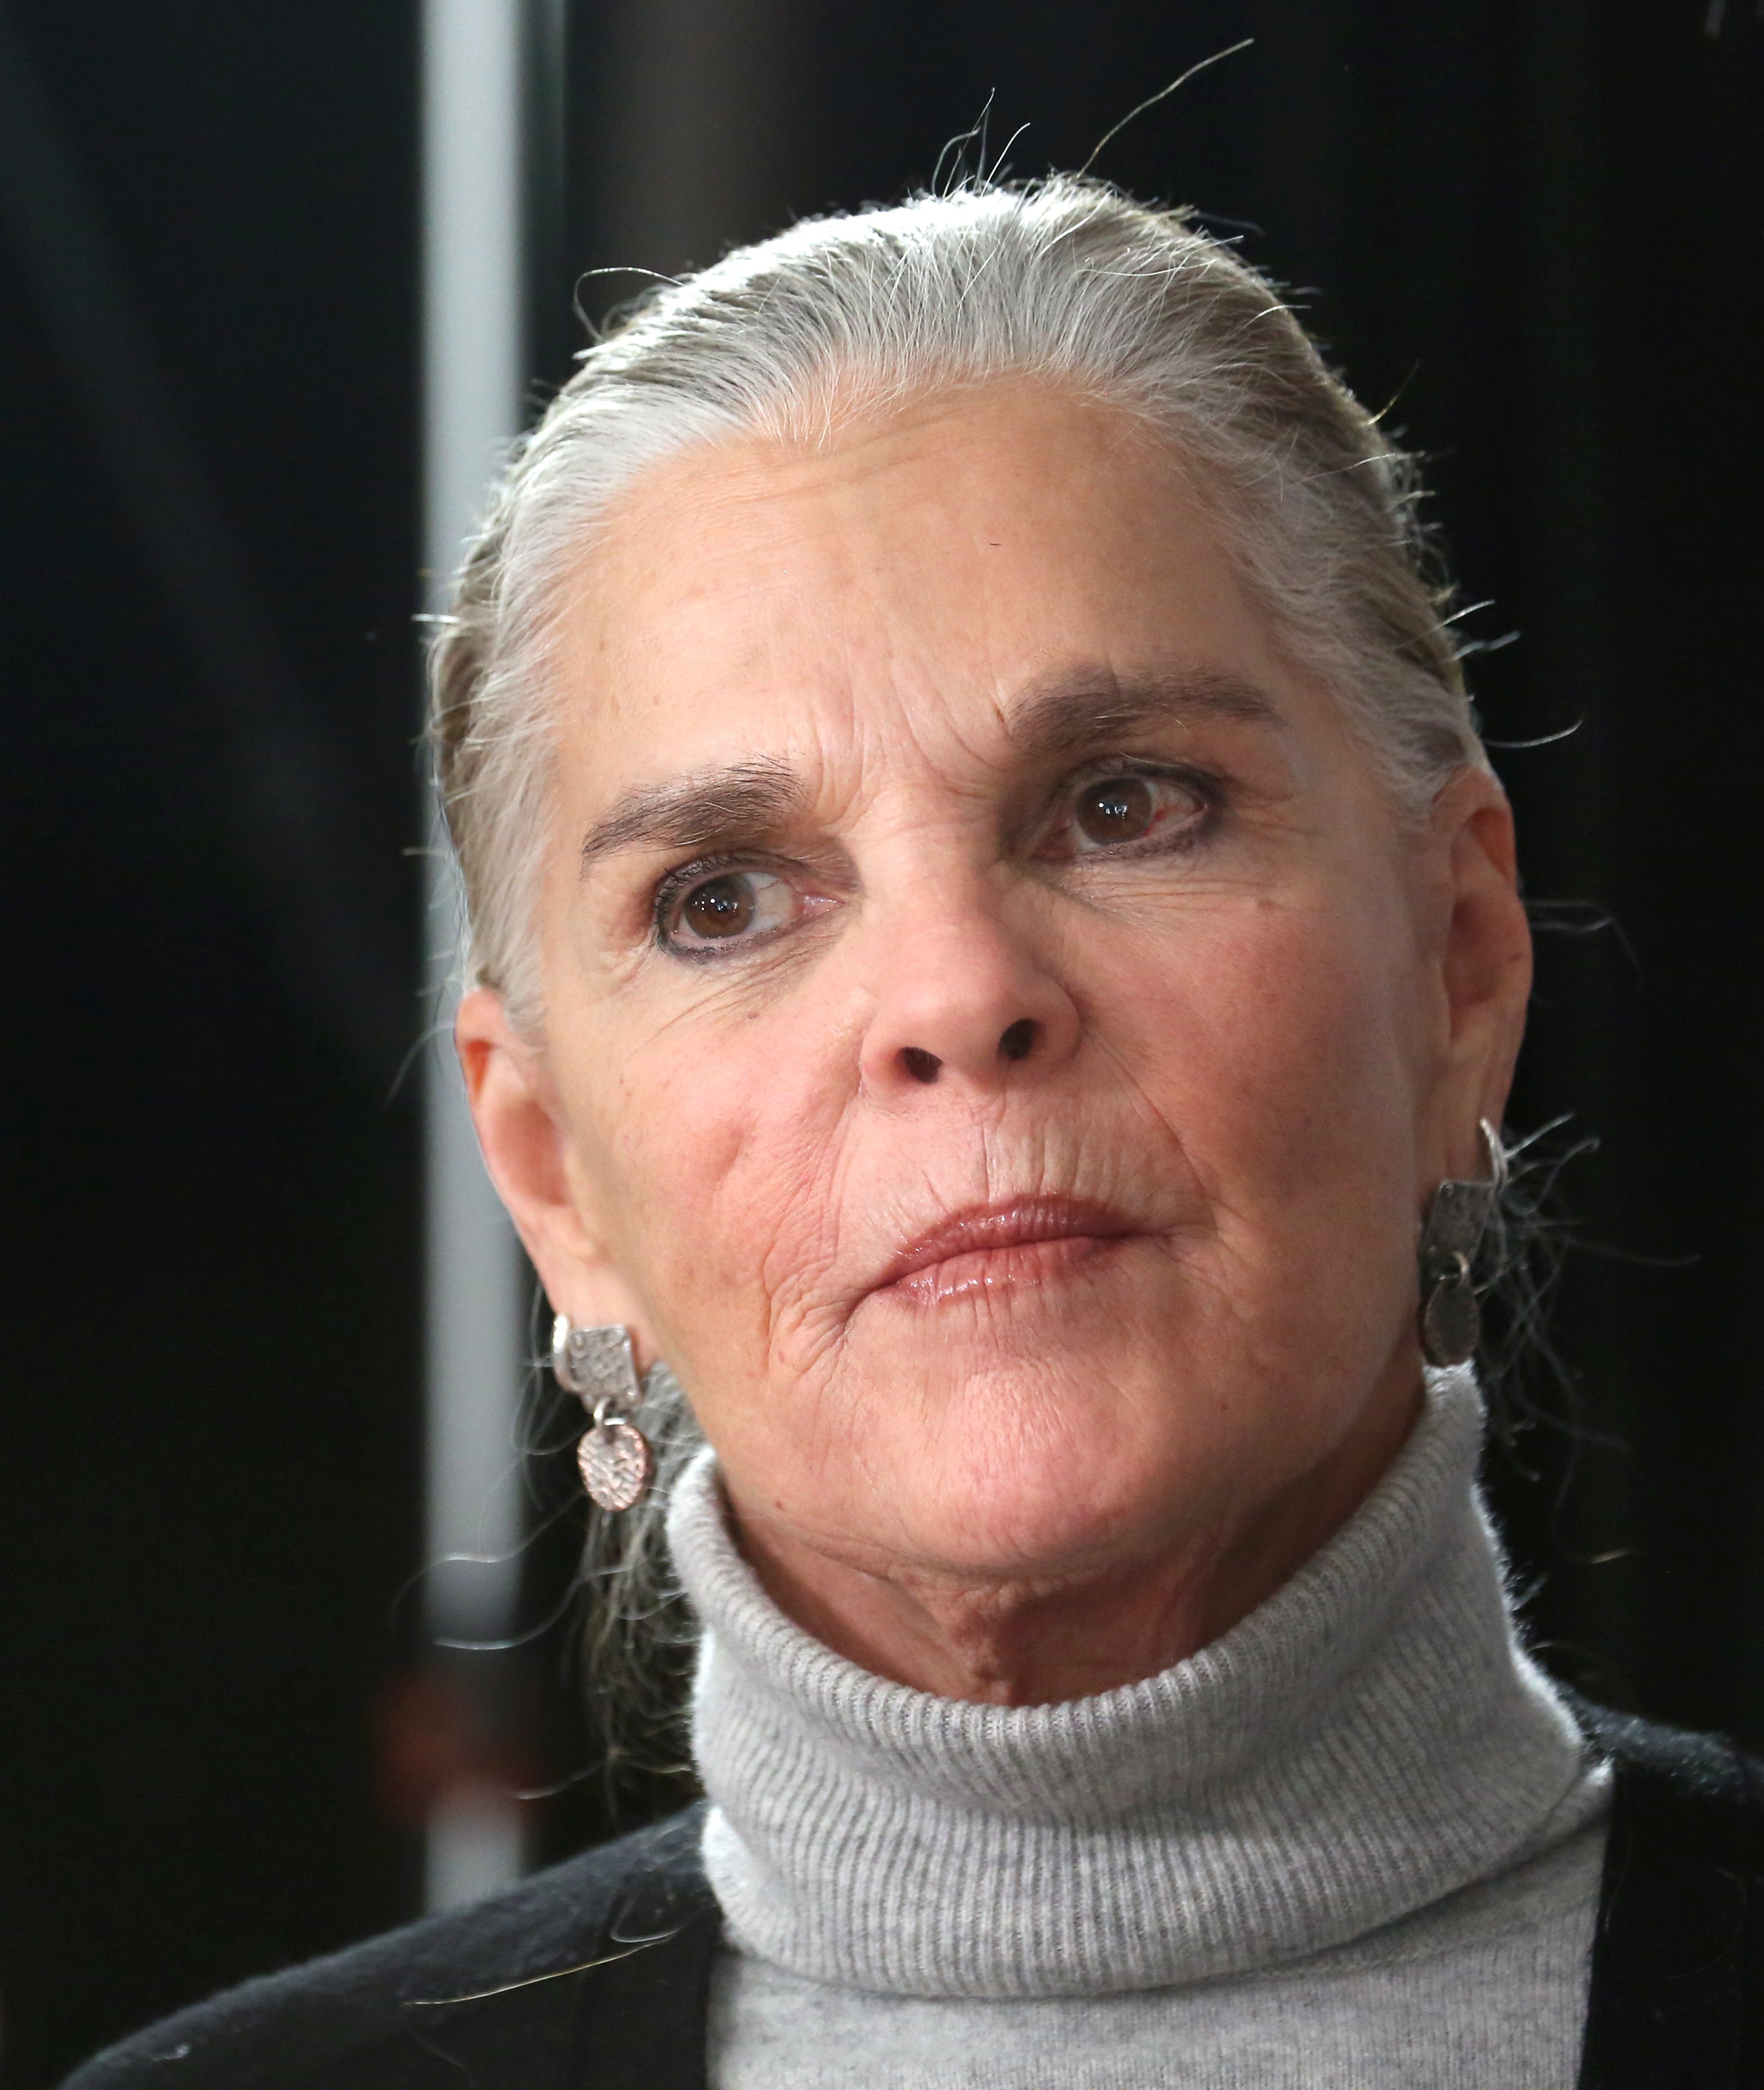 Ali MacGraw attends a photo call at The Shelter Studios Penthouse on February 24, 2015 in New York City | Photo: Getty Images